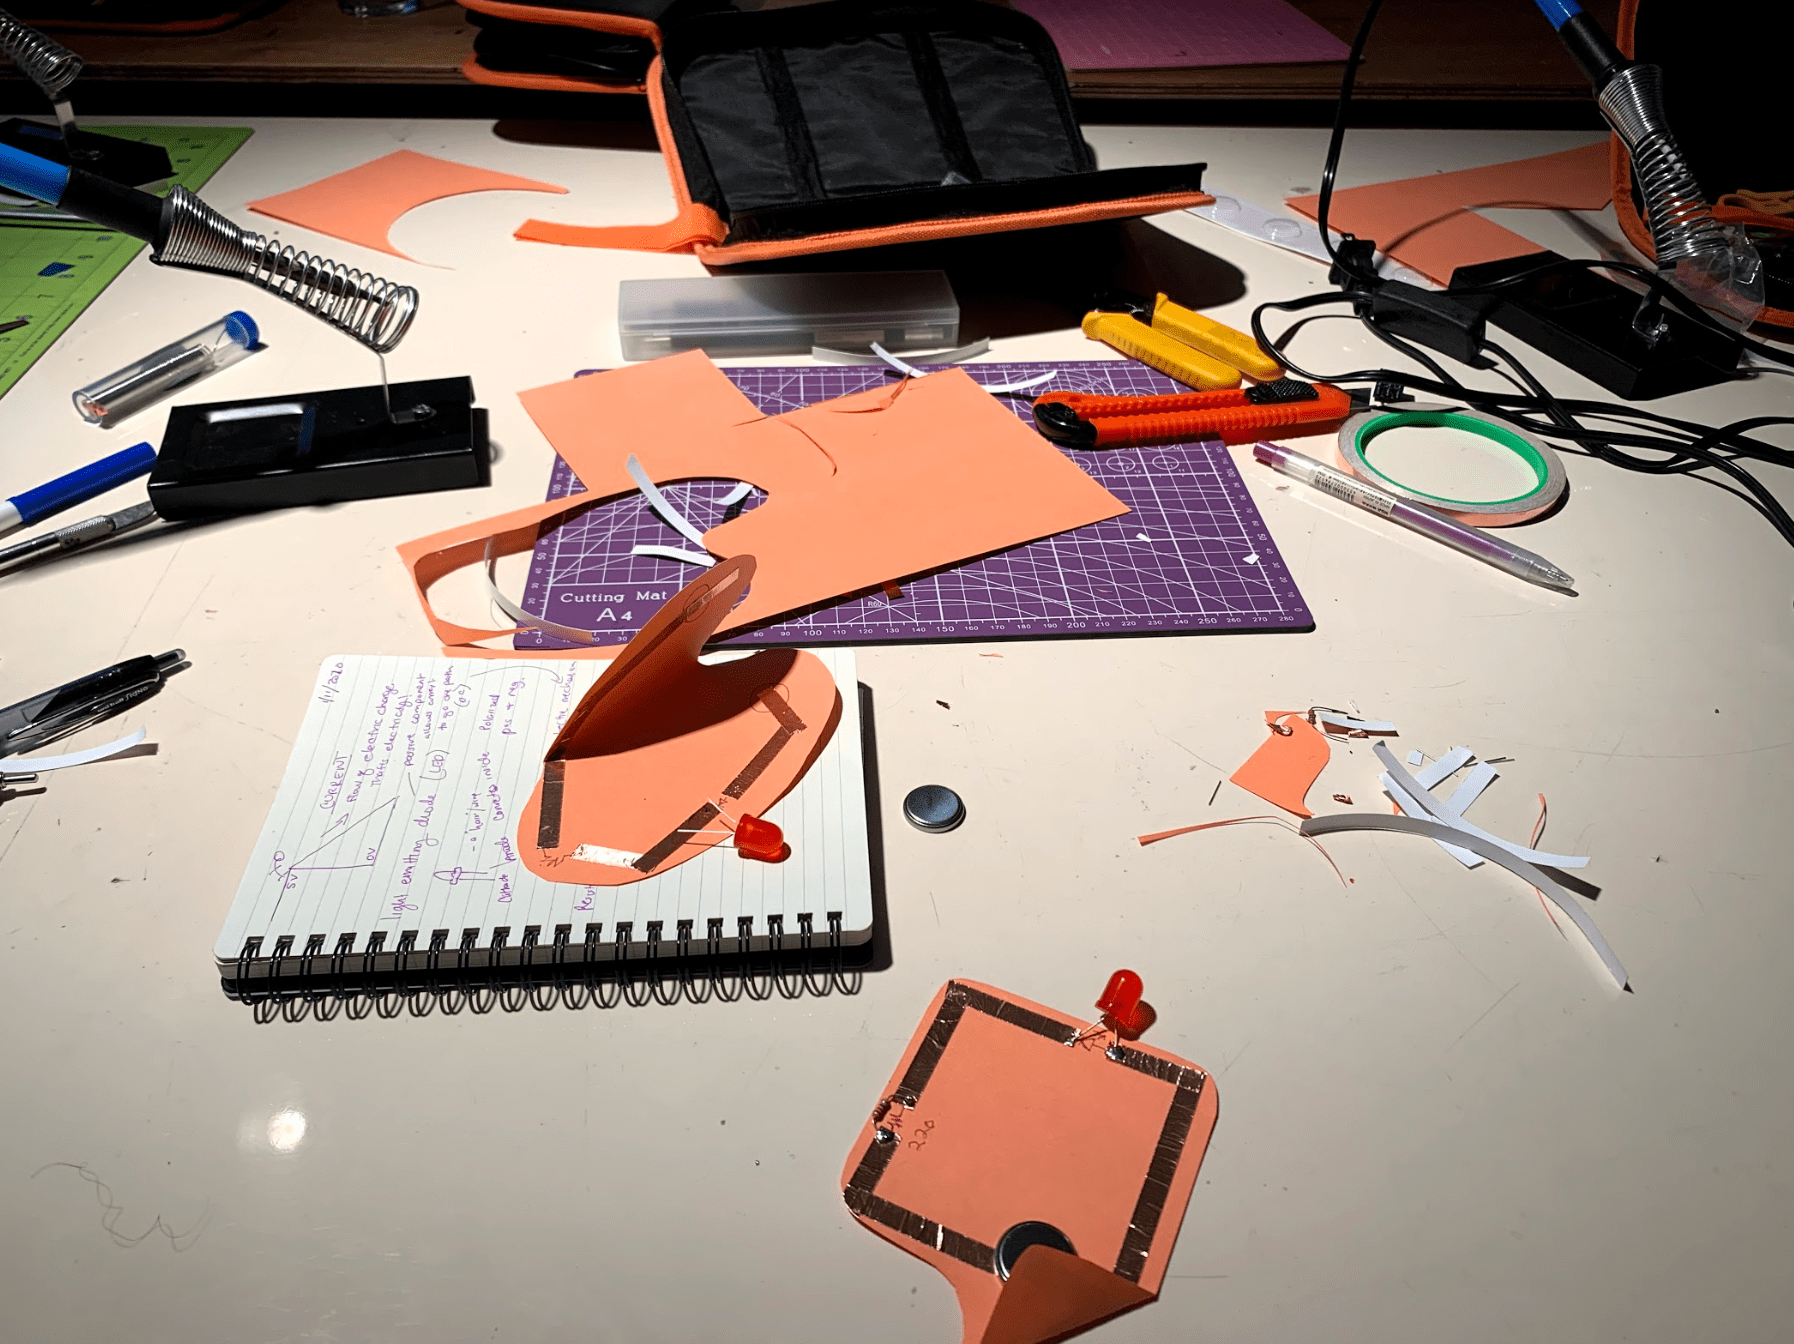 paper circuits, materials, notebooks, and sautering iron dispersed all over the table